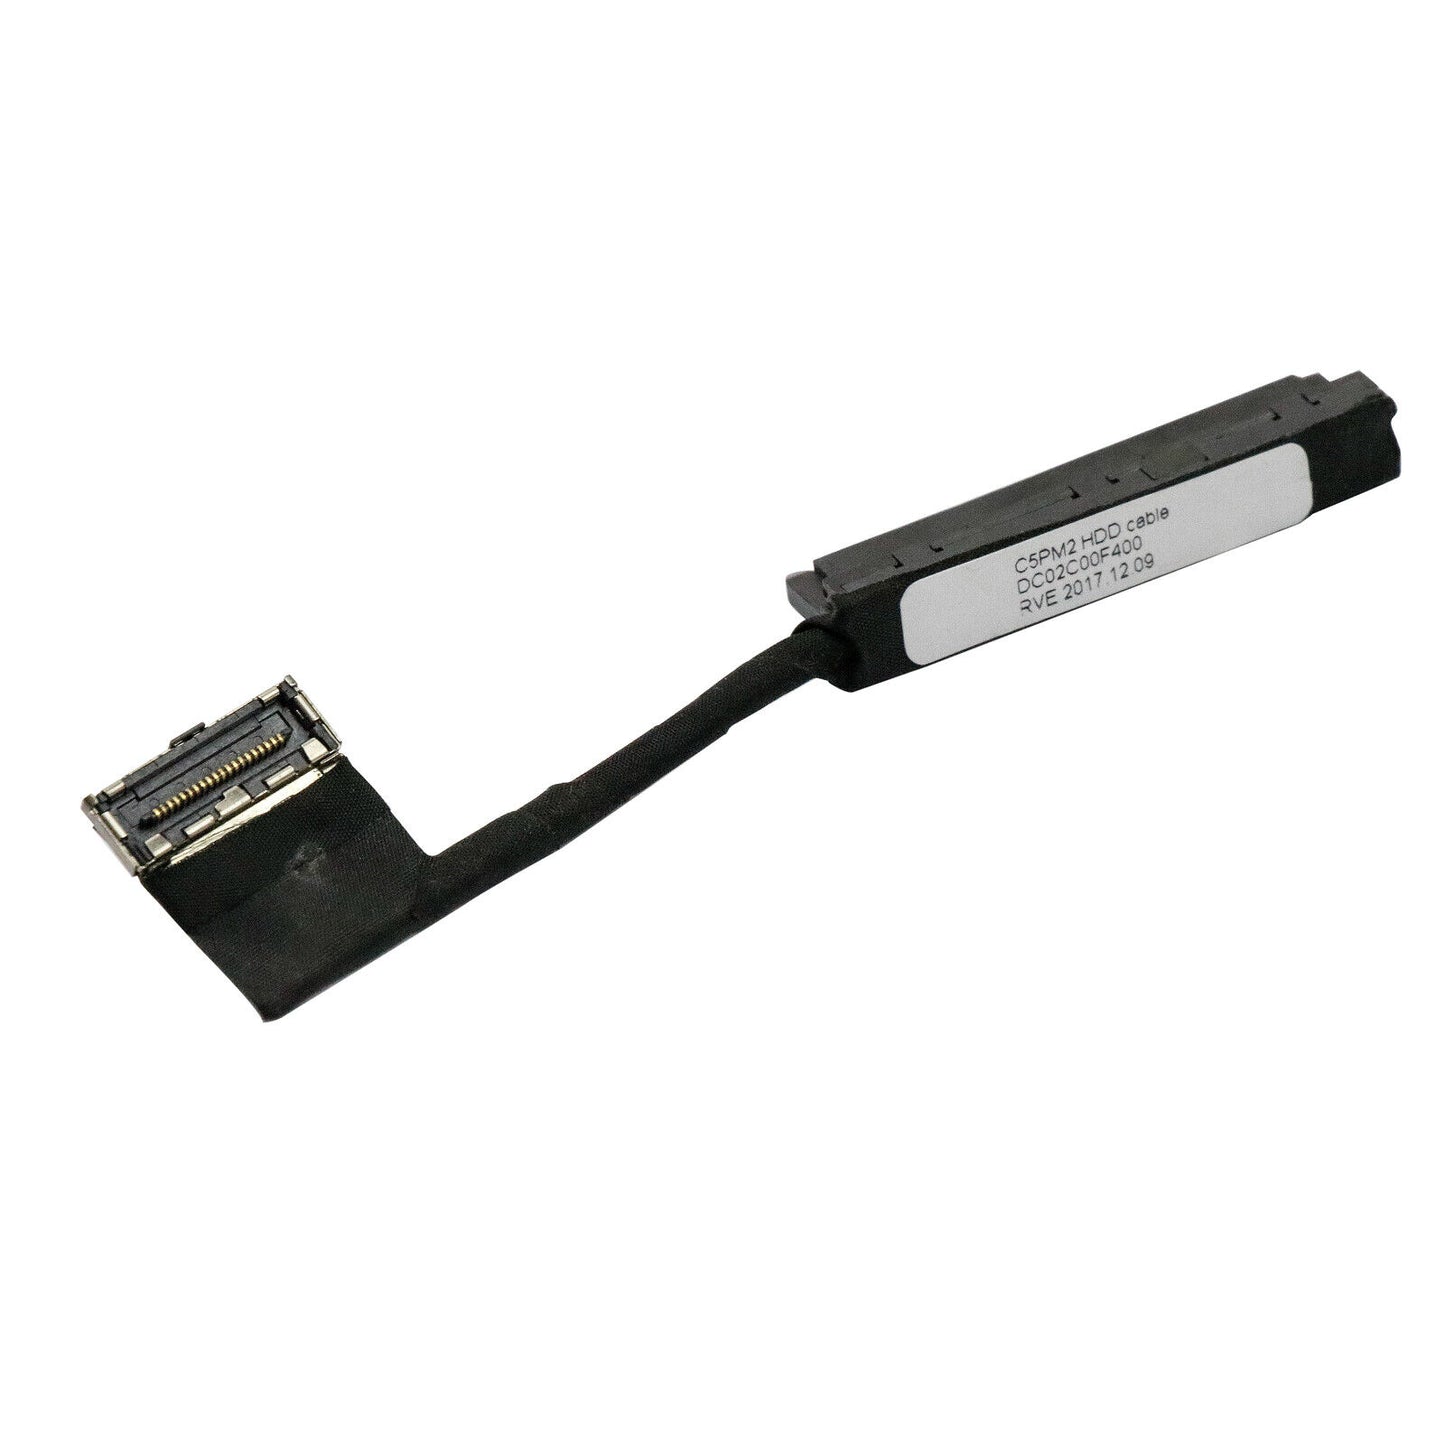 Acer New Hard Drive HDD SSD SATA IO Connector Cable C5PM2 Aspire VX5 VX5-591 VX5-591G N16C7 DC02C00F400 50.GM1N2.005